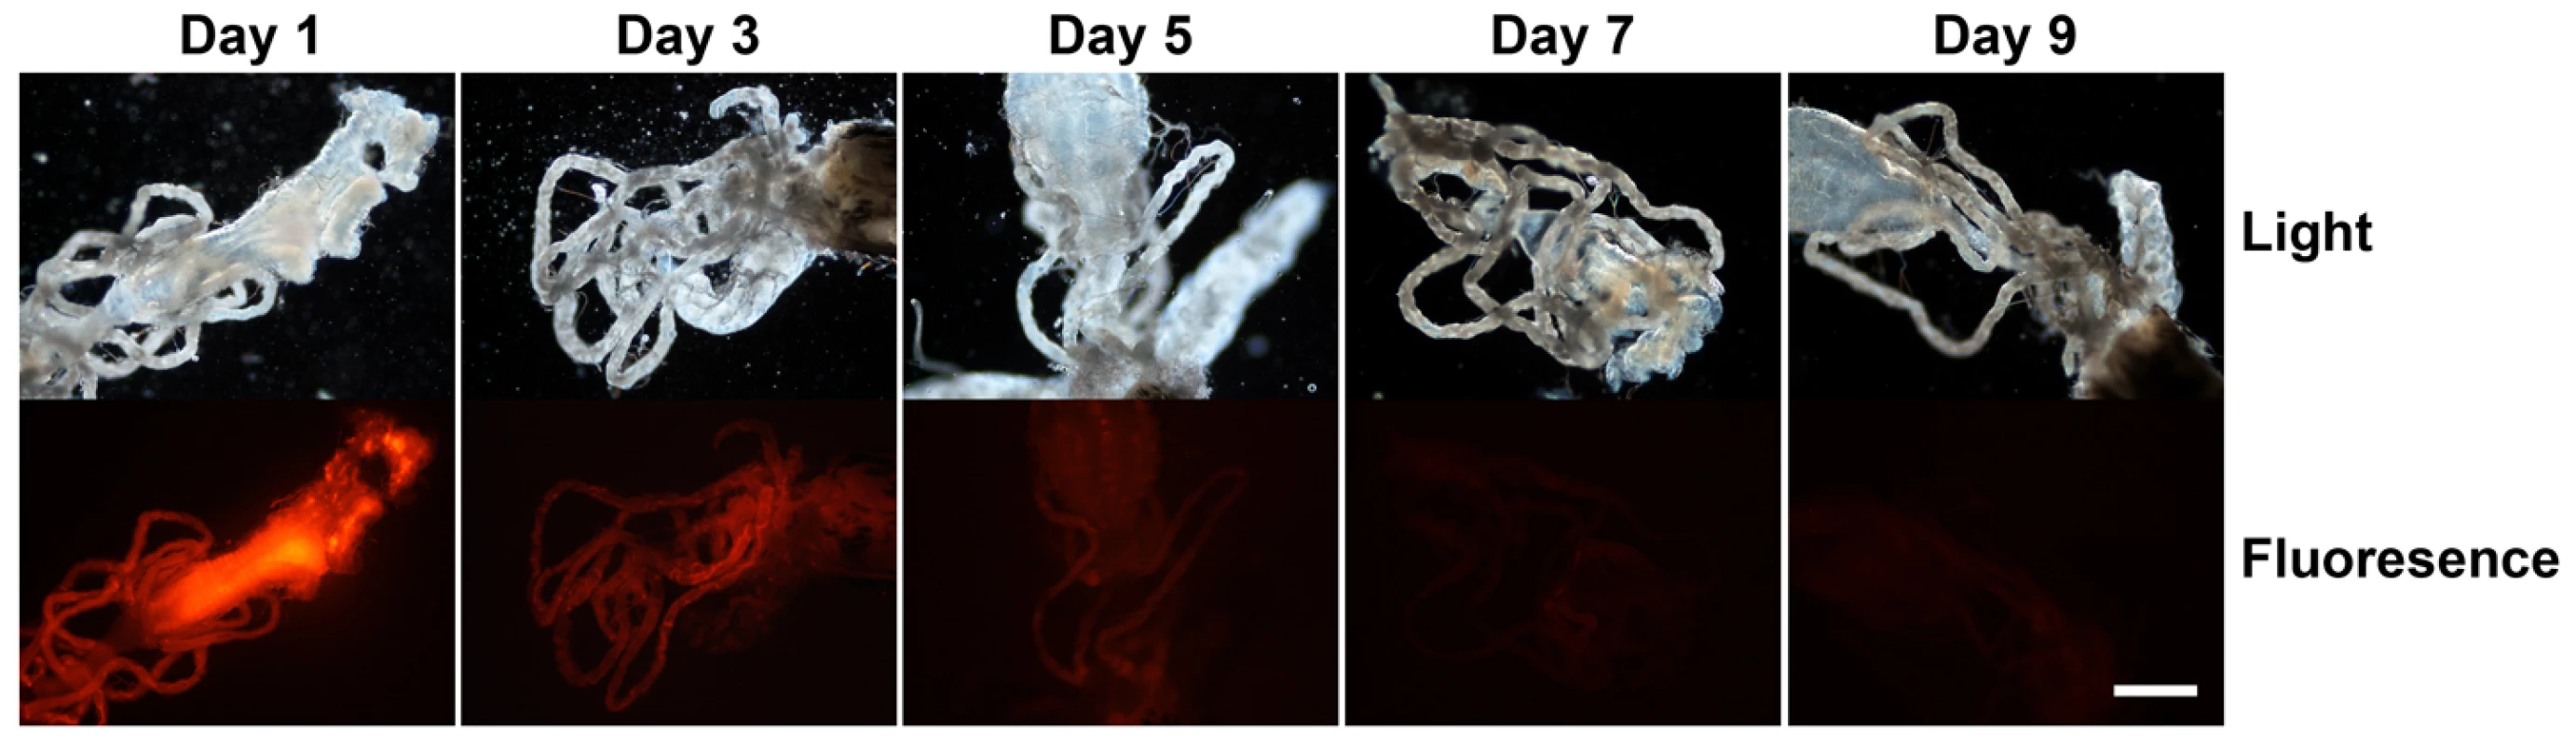 Dissemination and persistence of intrathoracically injected Cy 3-labelled <i>Brugia malayi</i> Cathepsin-L1 siRNAs in <i>Aedes aegypti</i>.